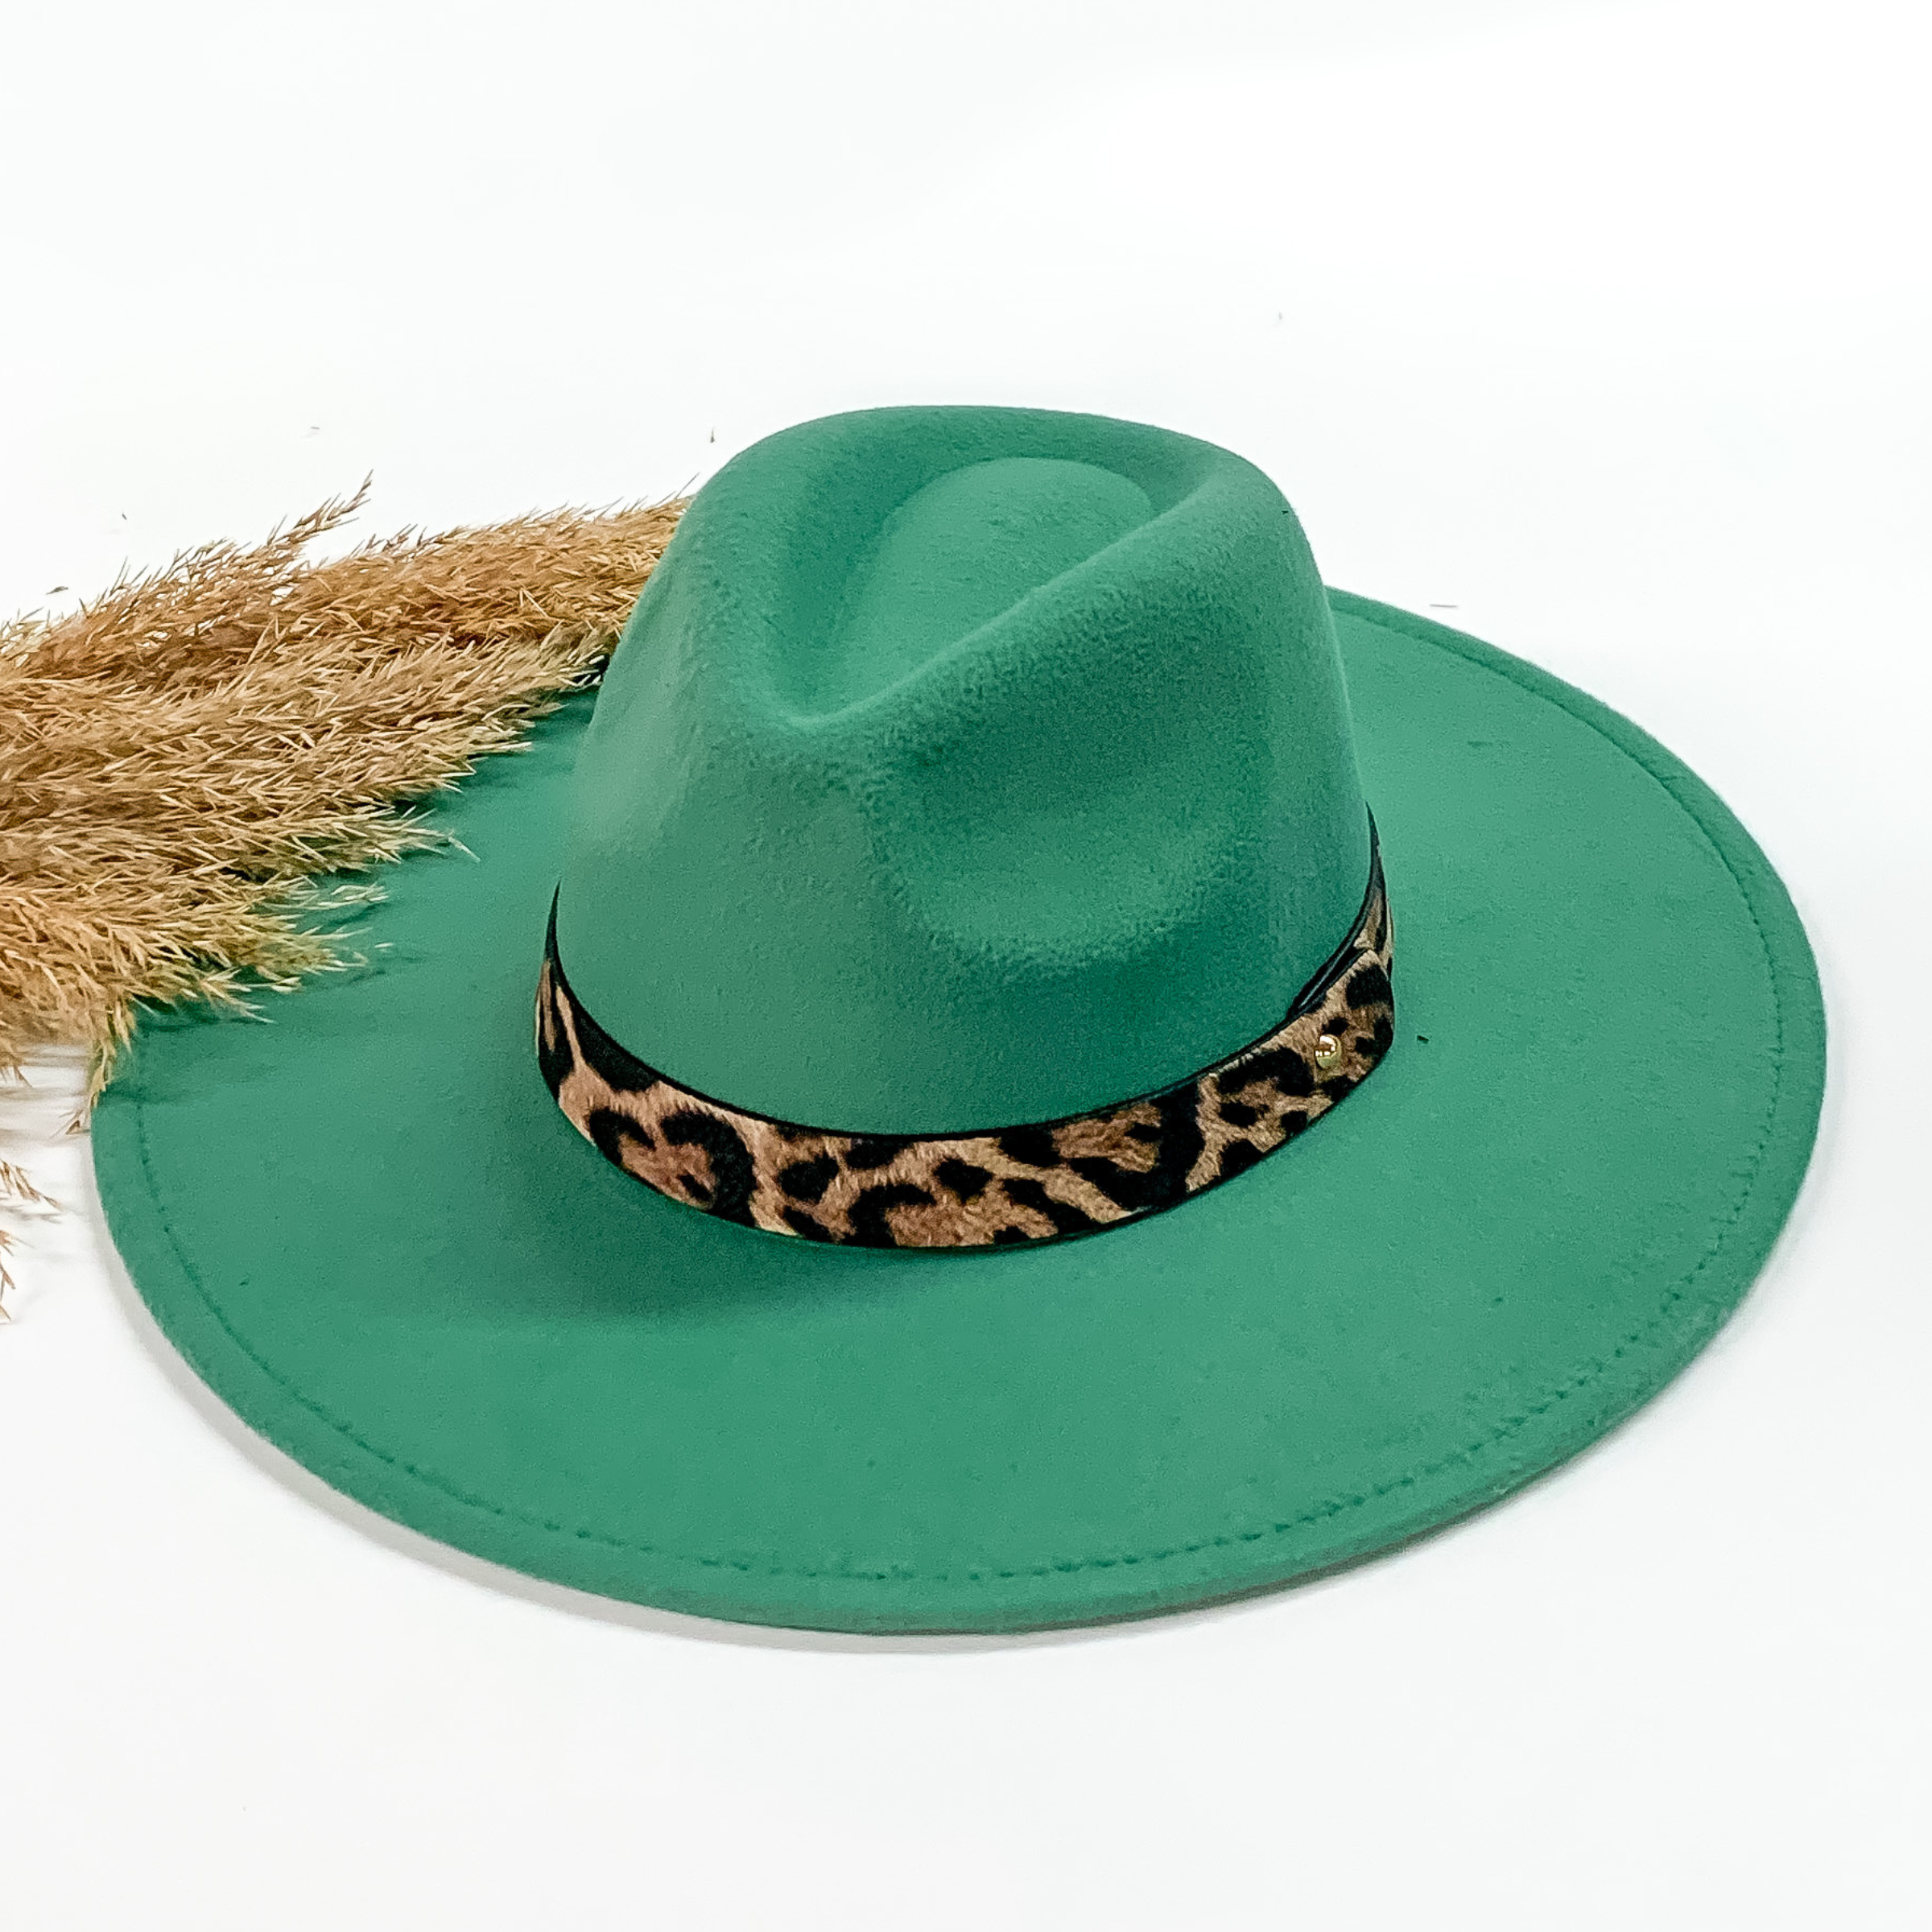 Turquoise faux felt hat with a leopard print hat band. This hat is pictured on a white background with tan pompous in the background.